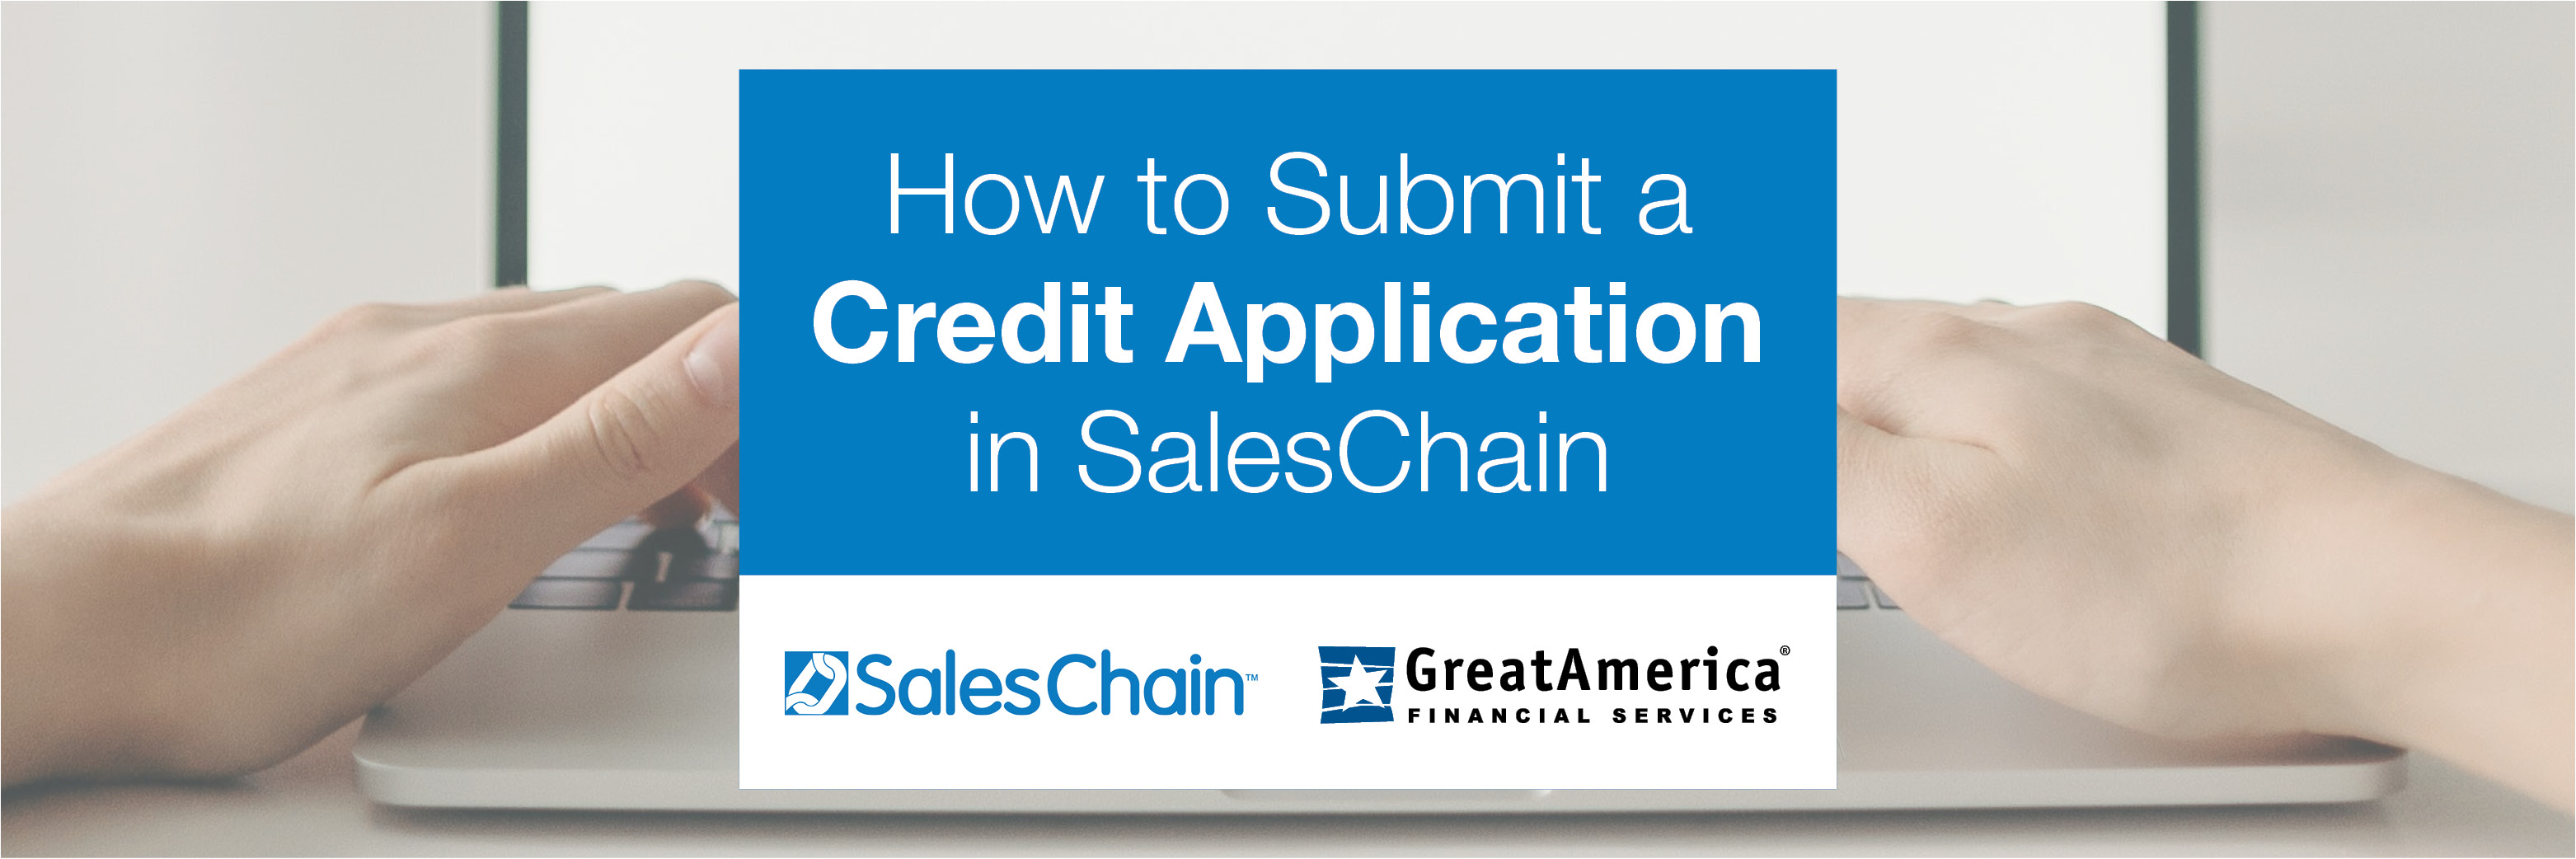 How to Submit a Credit Application in SalesChain